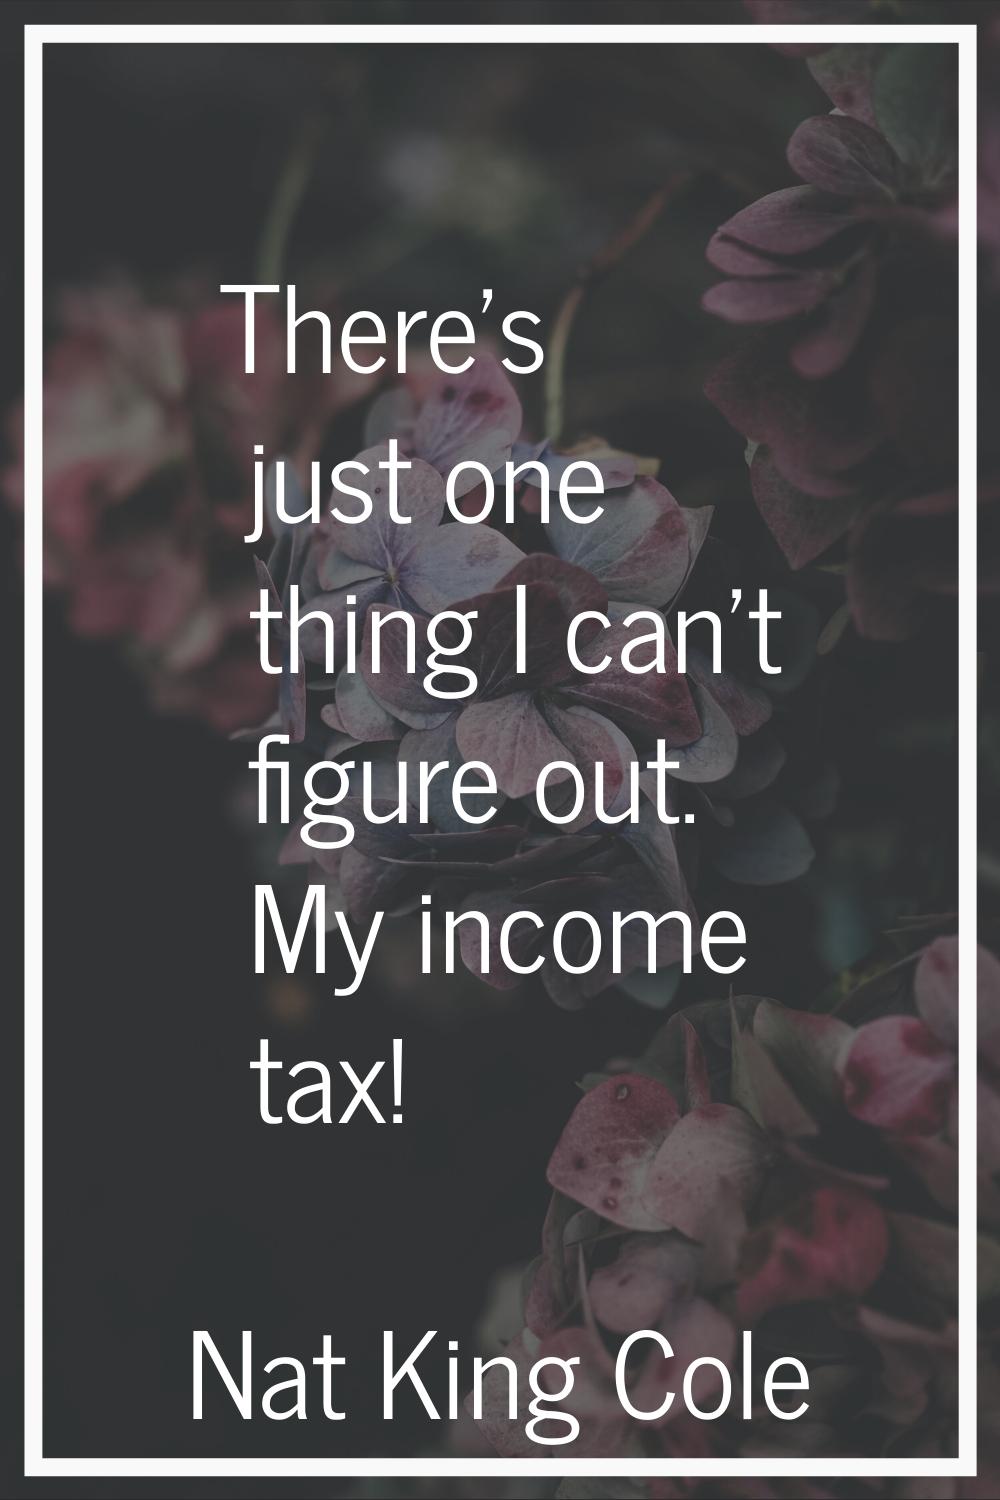 There's just one thing I can't figure out. My income tax!